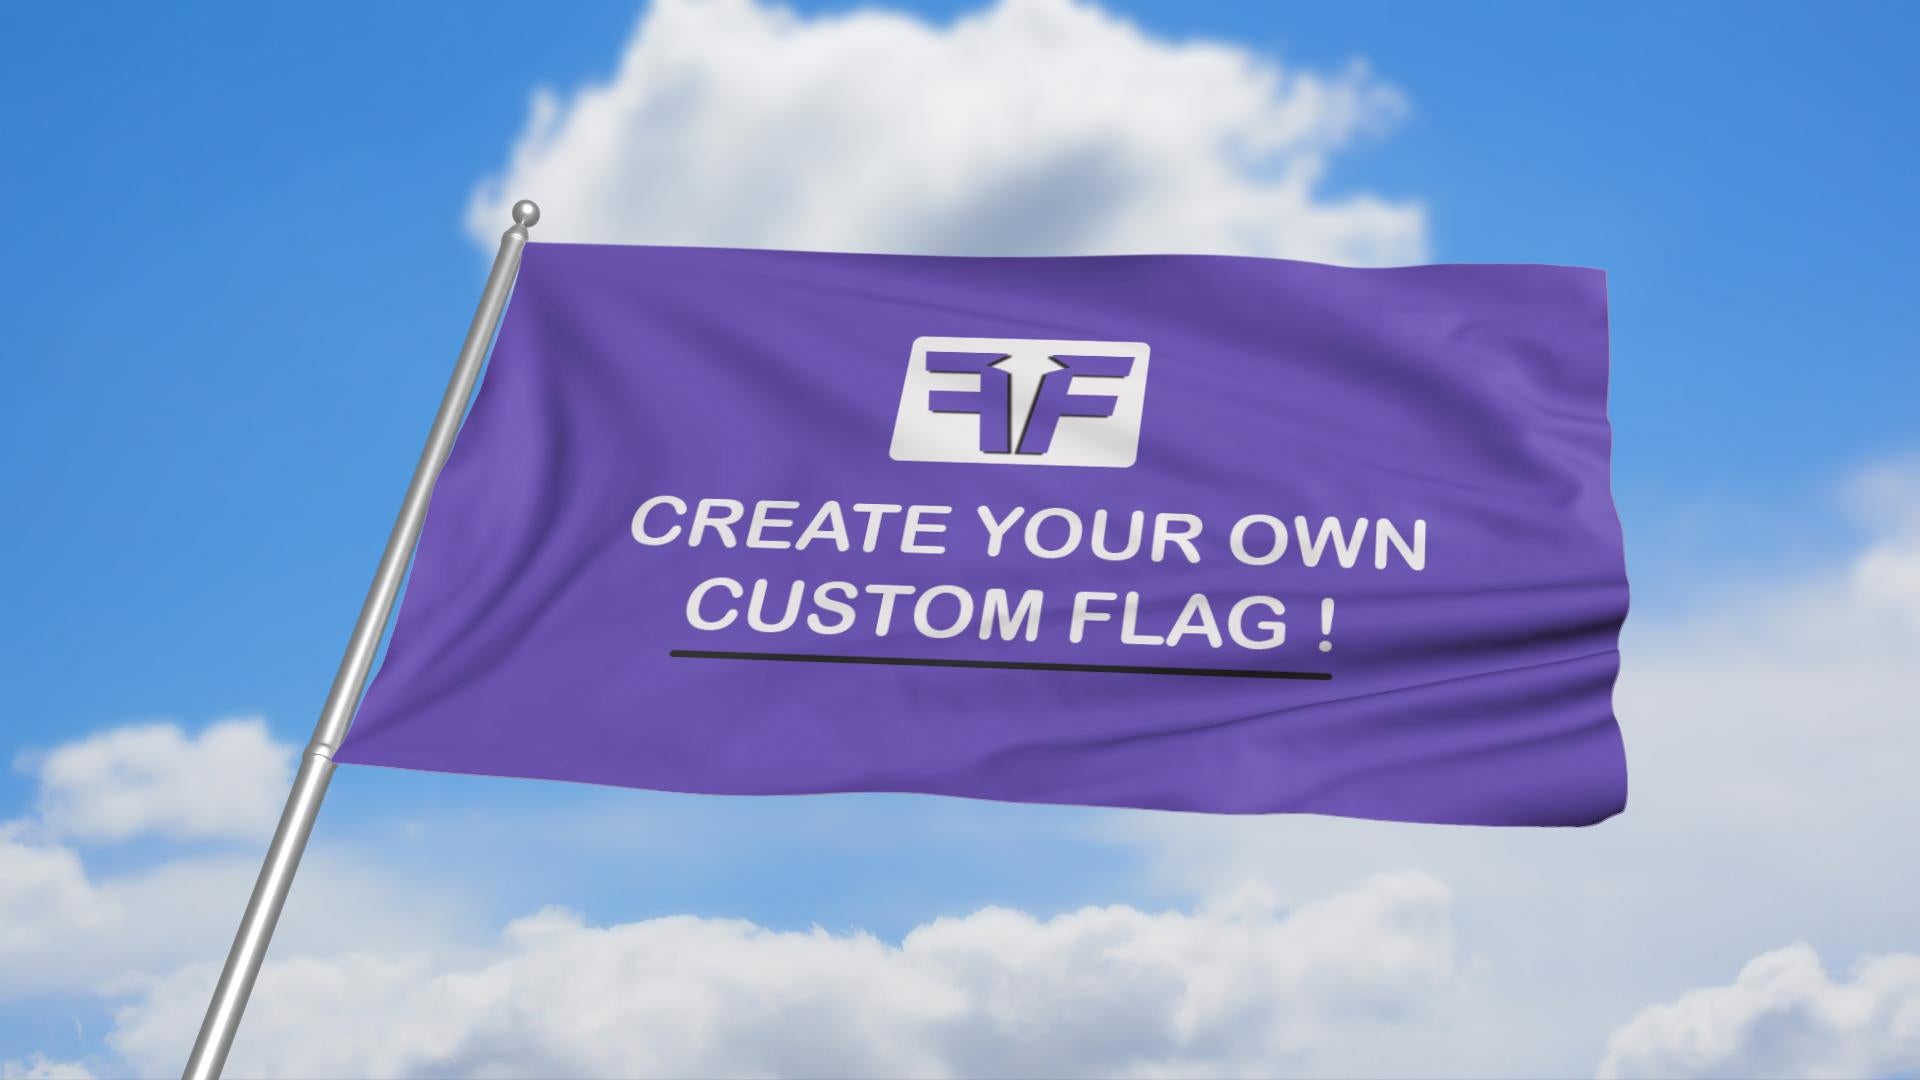 Fest Flags | Affordable Custom Designed Flags & Banners. Done